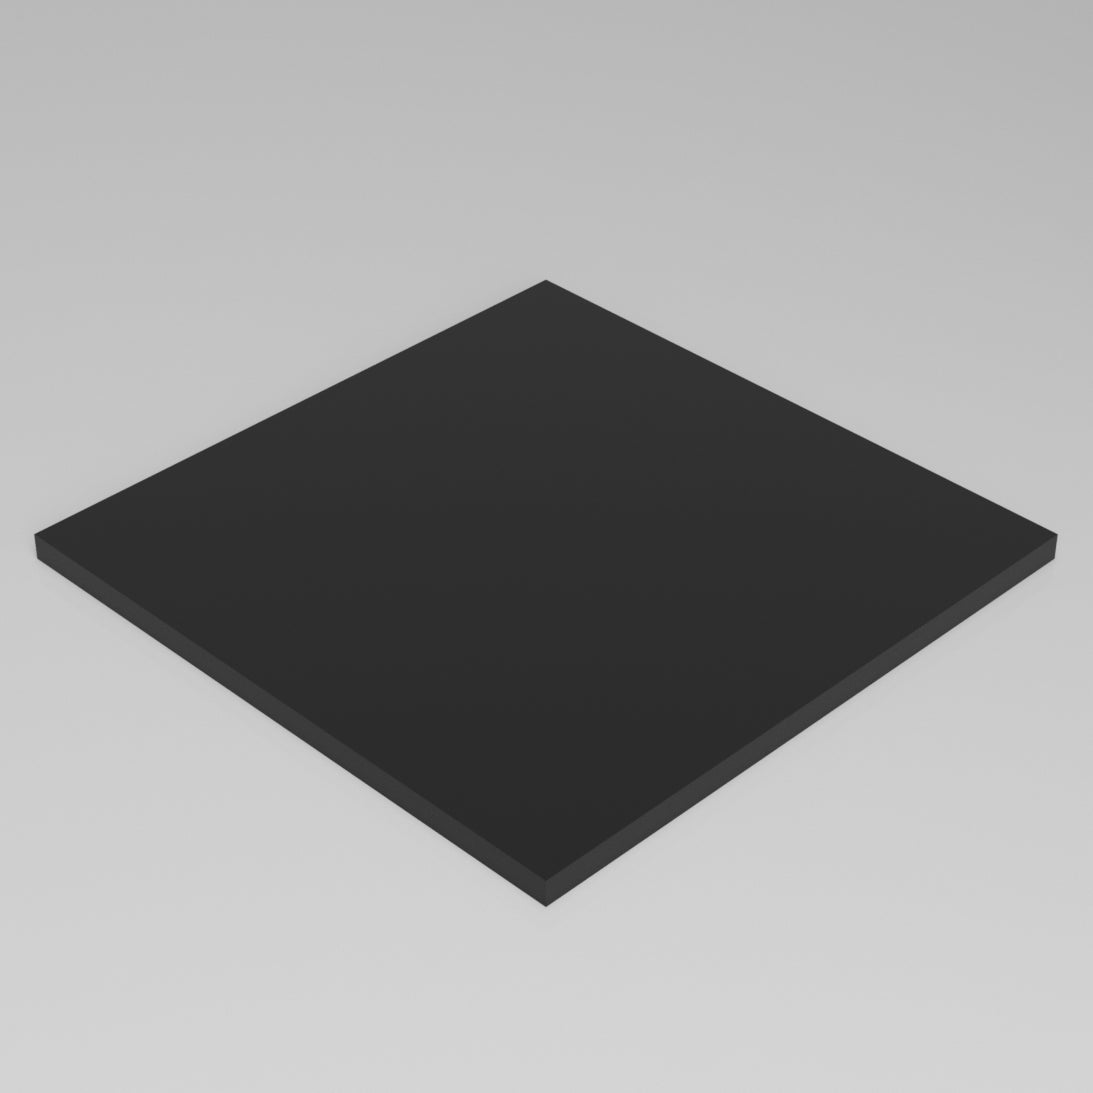 Machinable Wax Rectangular Block Front View 1 Inch by 24 Inch by 24 Inch